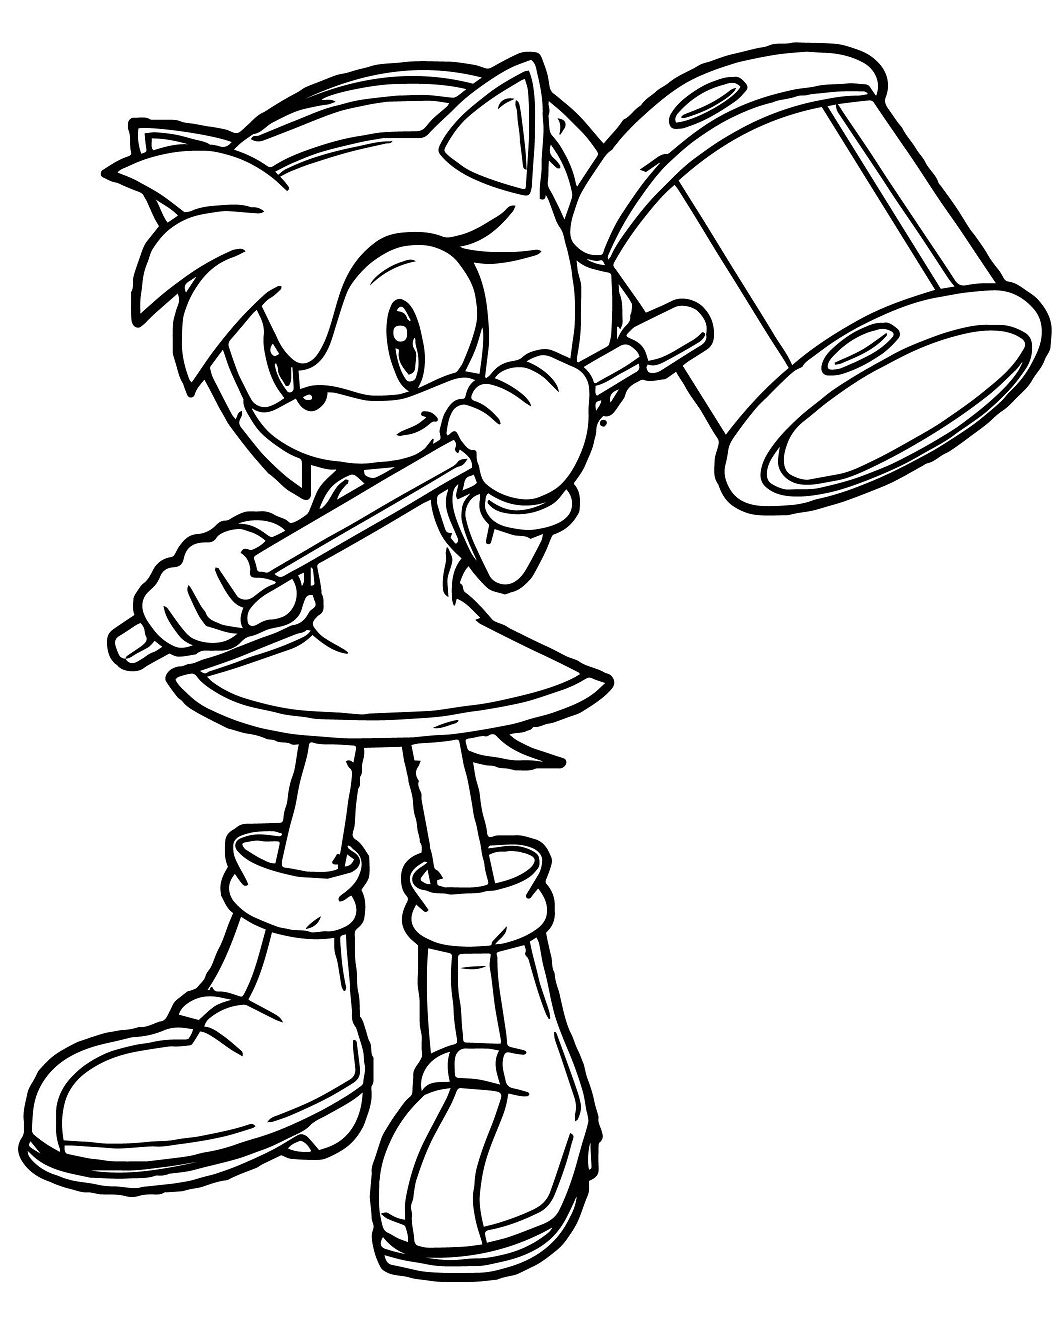 Amy Rose With Hammer Coloring Page